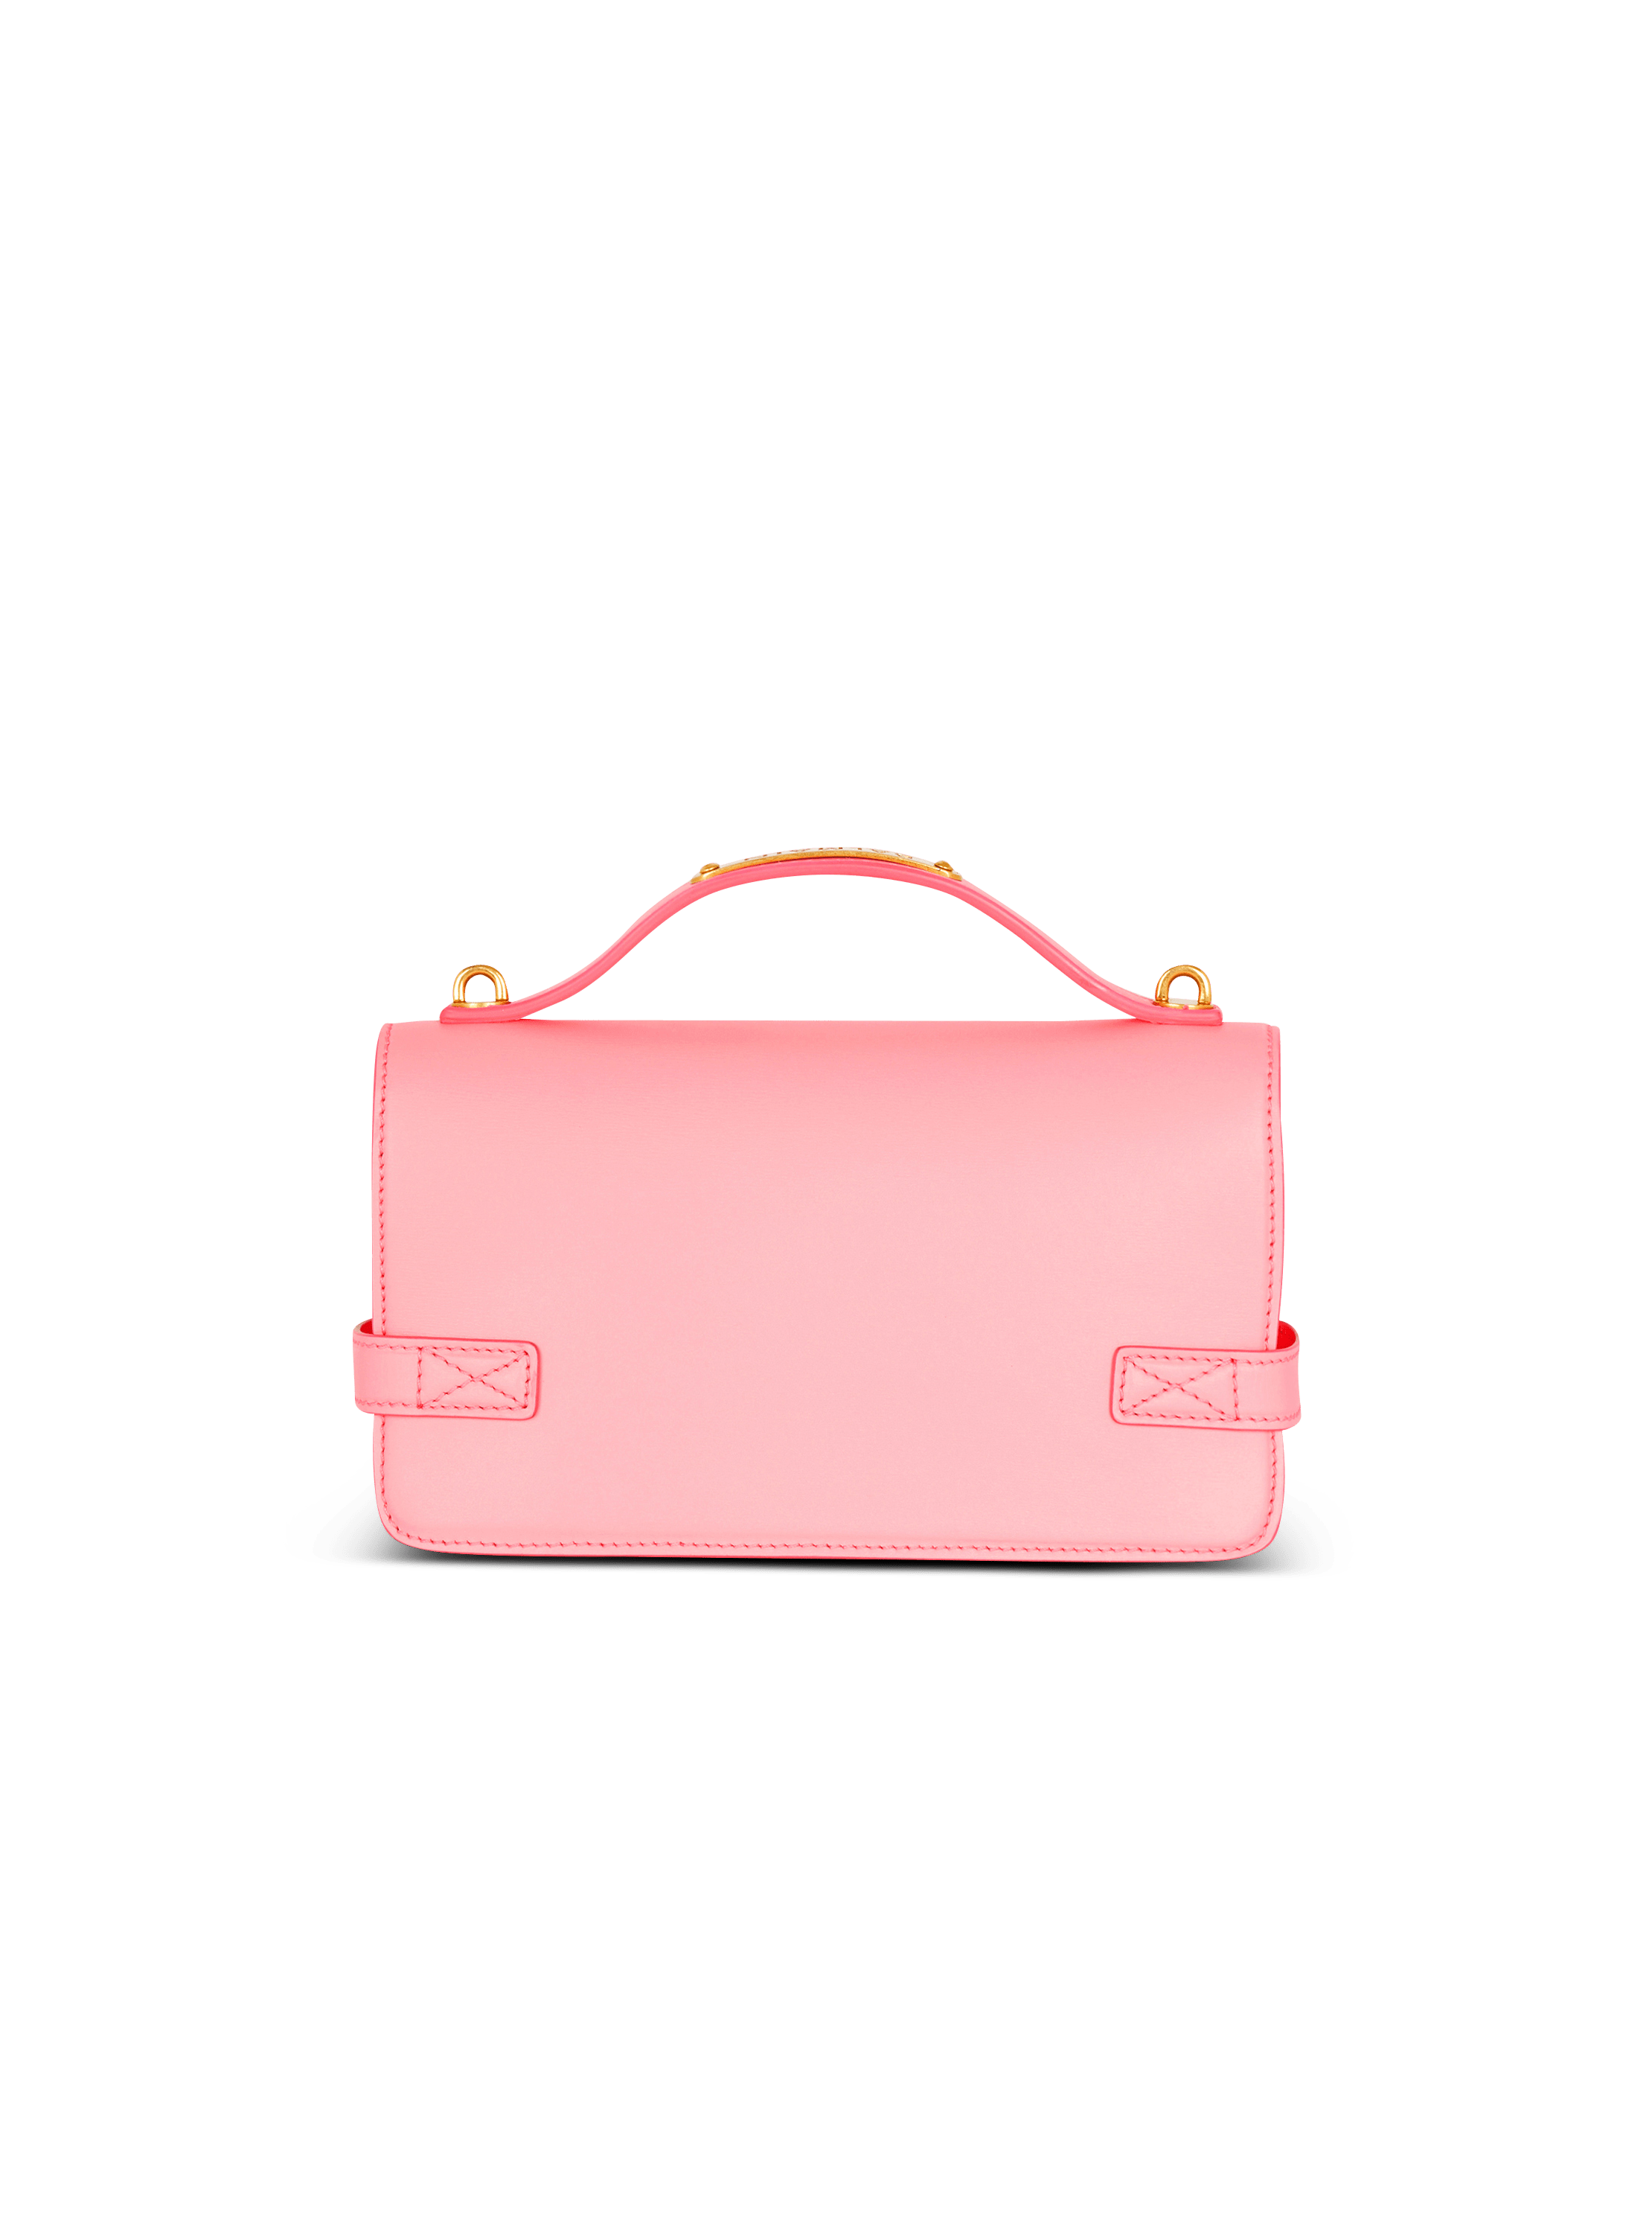 B-Buzz 24 grained leather bag